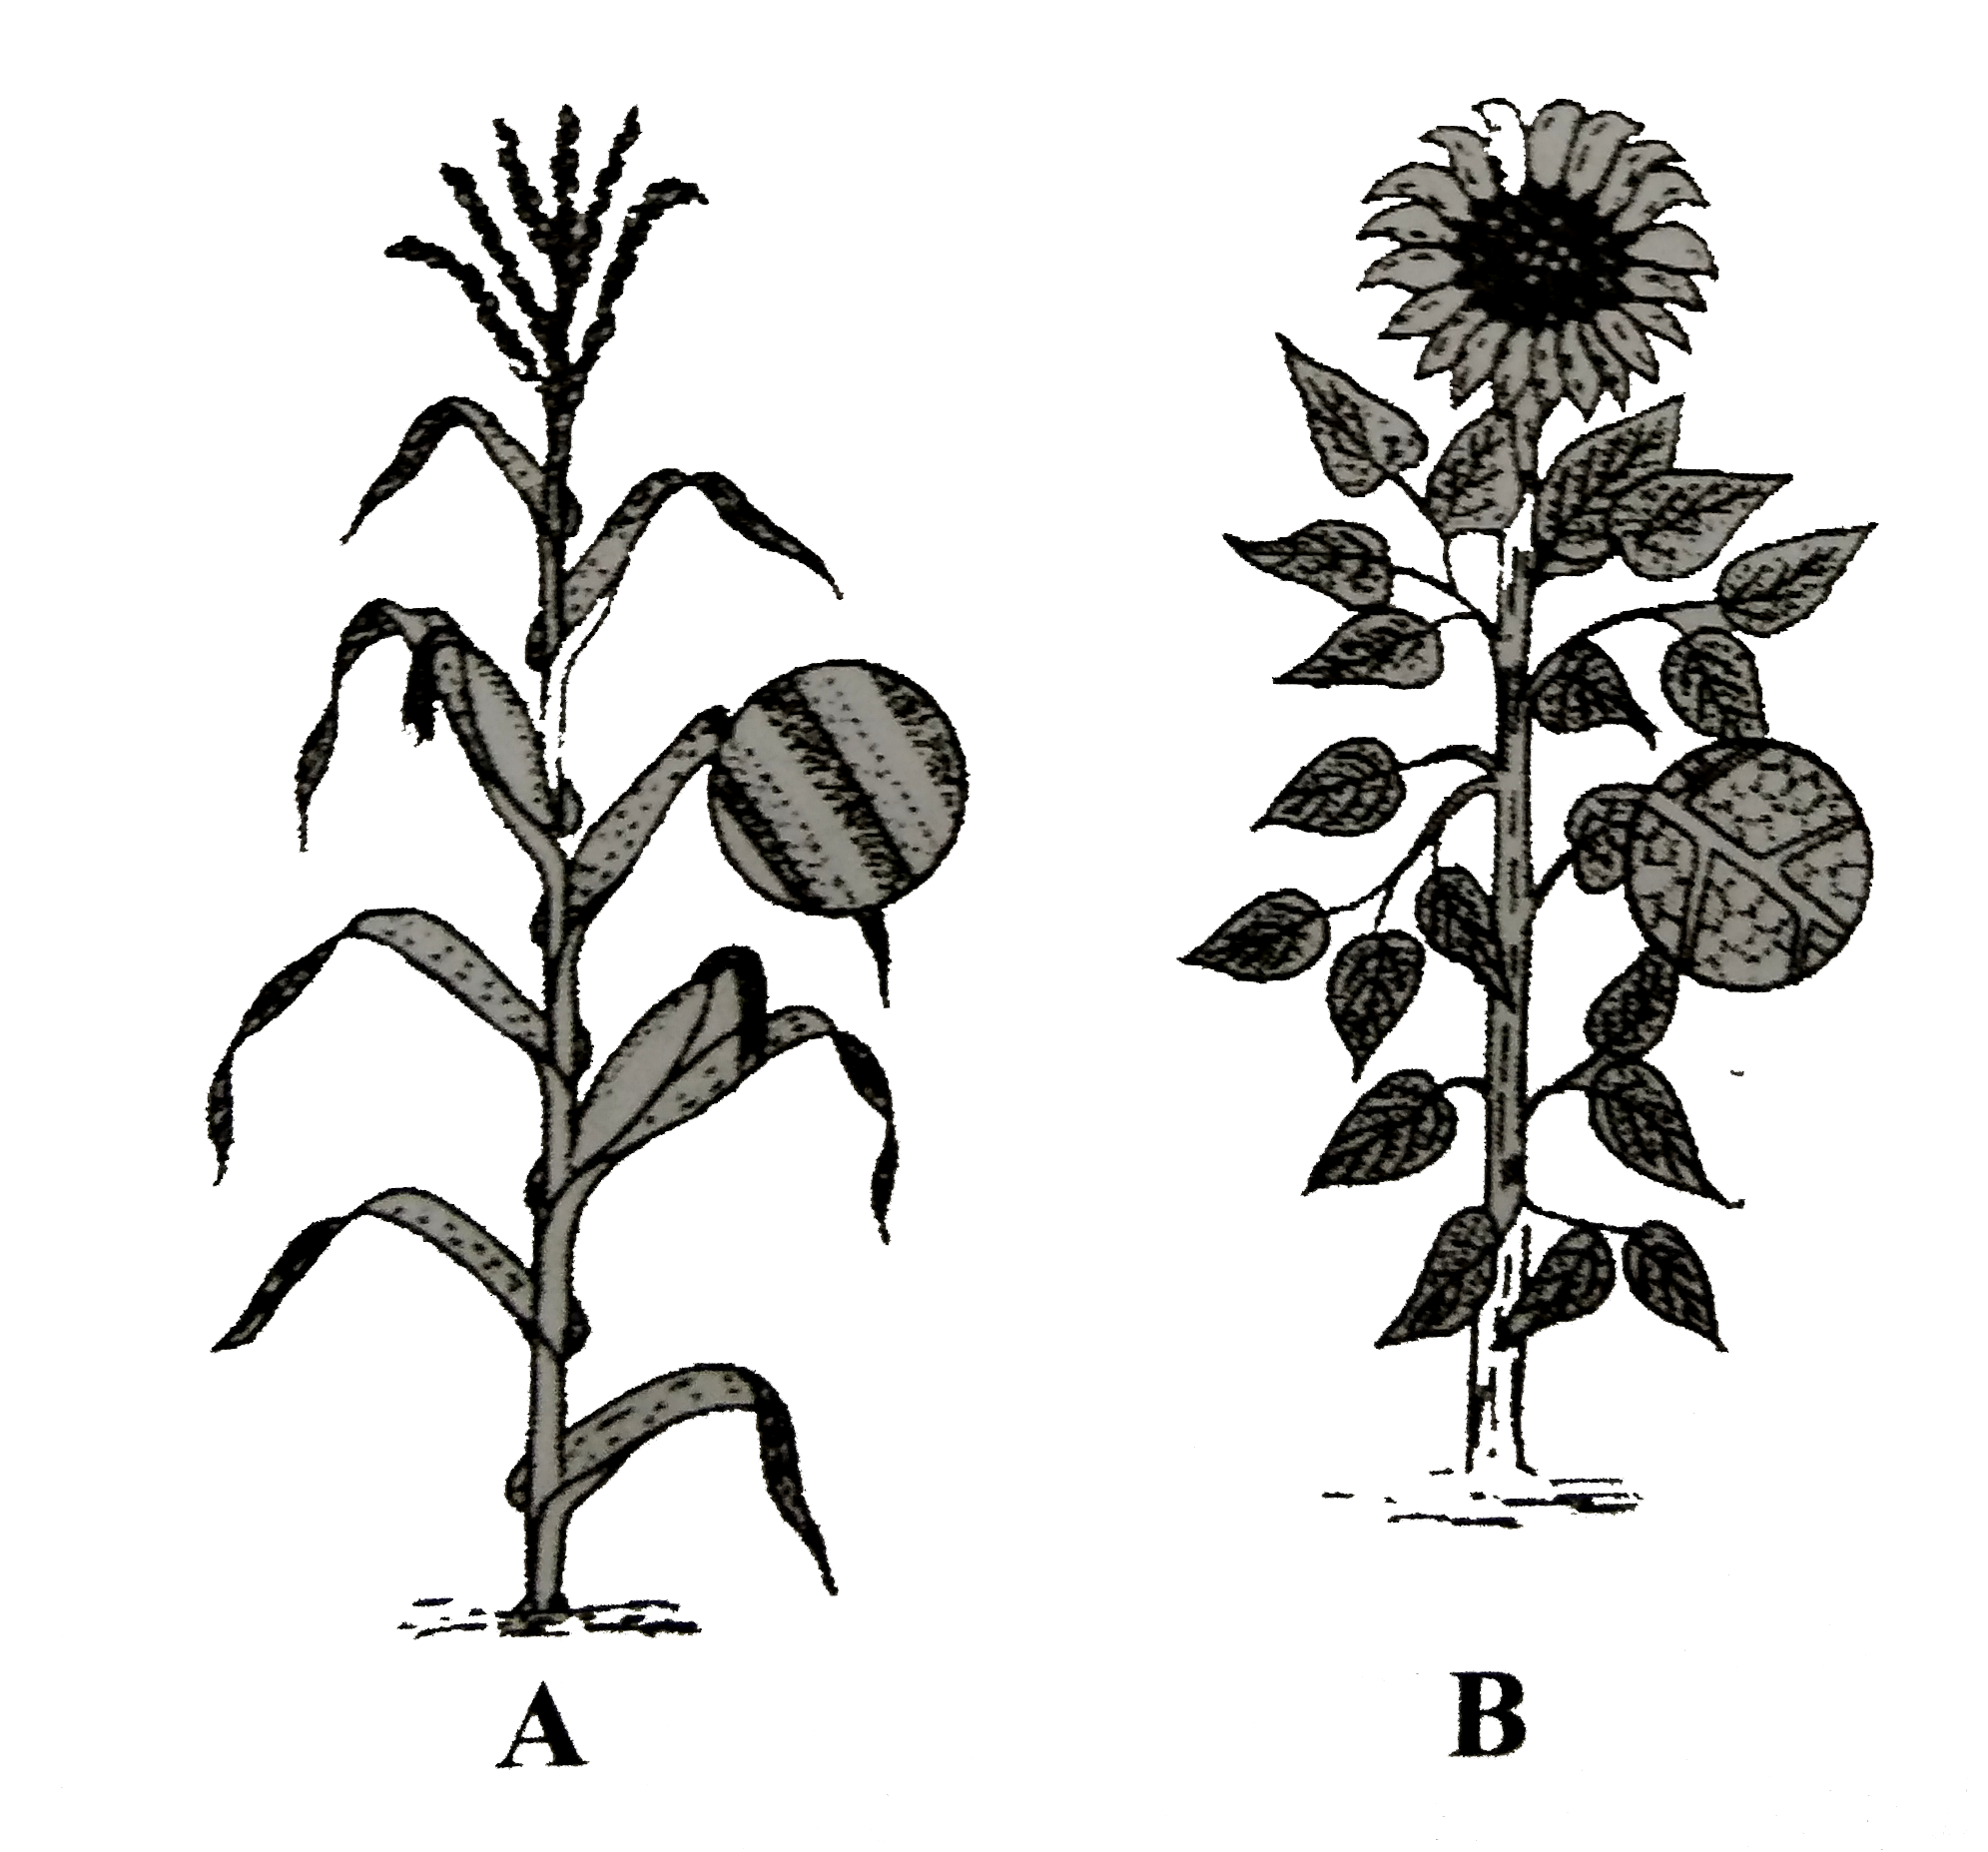 Angiosperms A and B shown in the figure belong to the classand respectively.